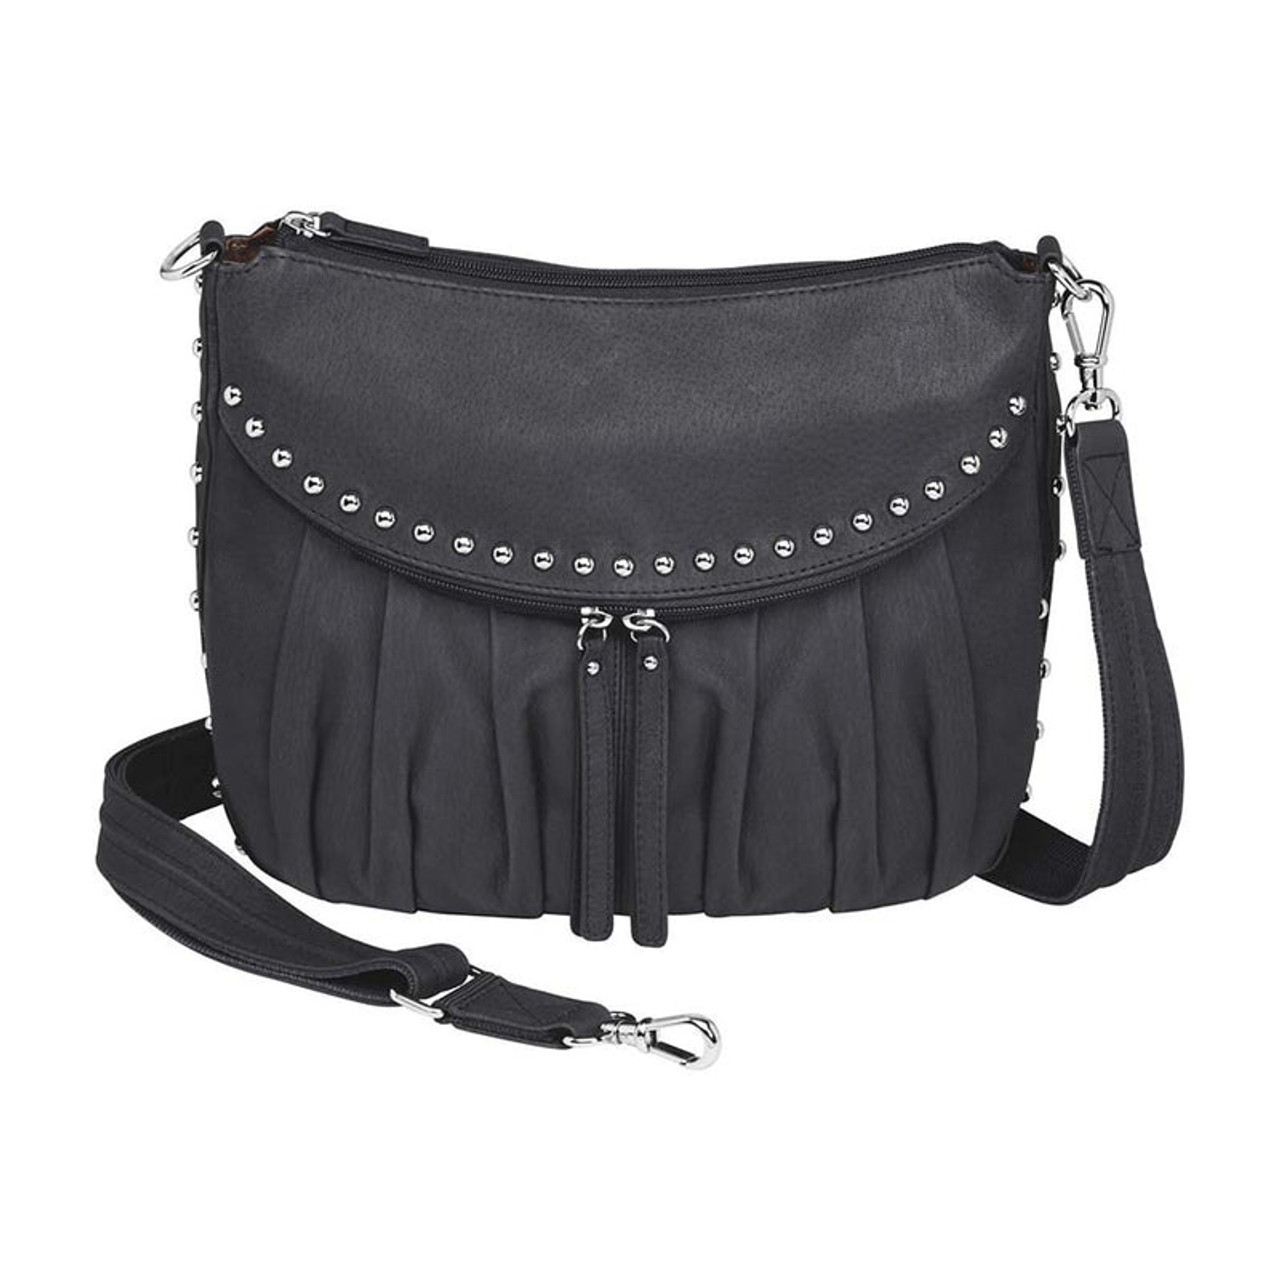 GTM Concealed Carry Uptown Purse